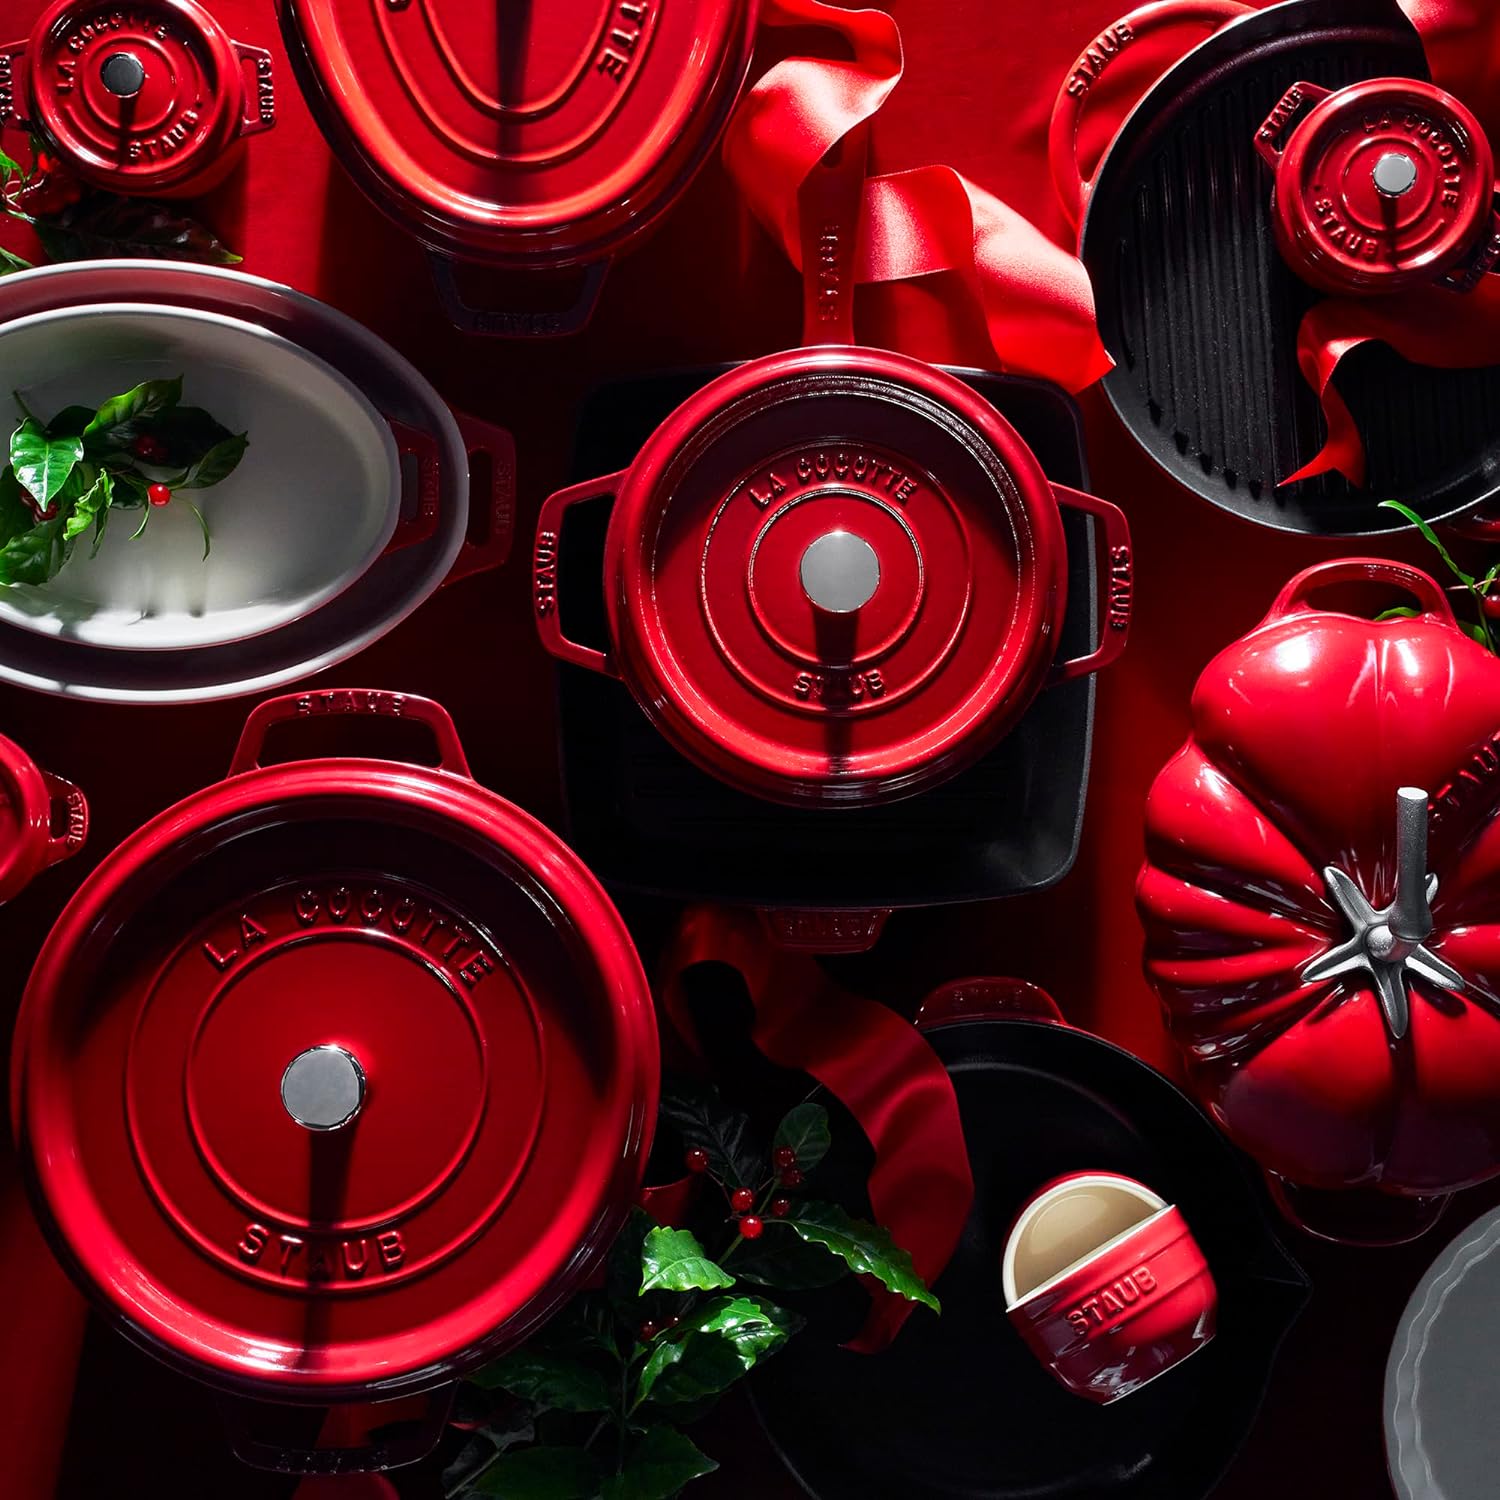 The Best  Deals on Staub Cookware: Save Up to 57% on Dutch Ovens,  Bakeware and More